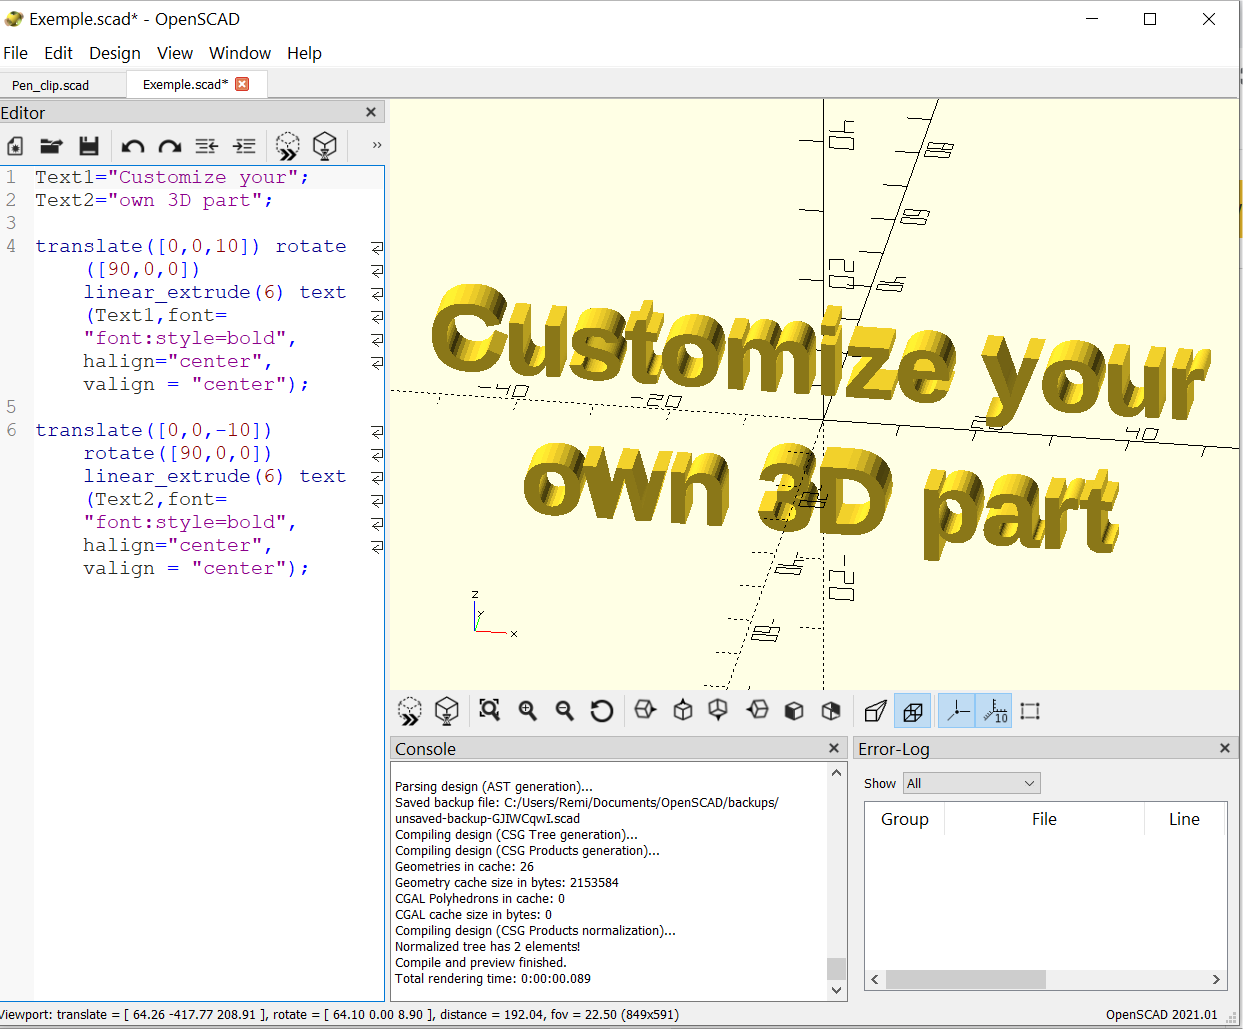 Learn How to Use Customizable 3D Models With OpenSCAD